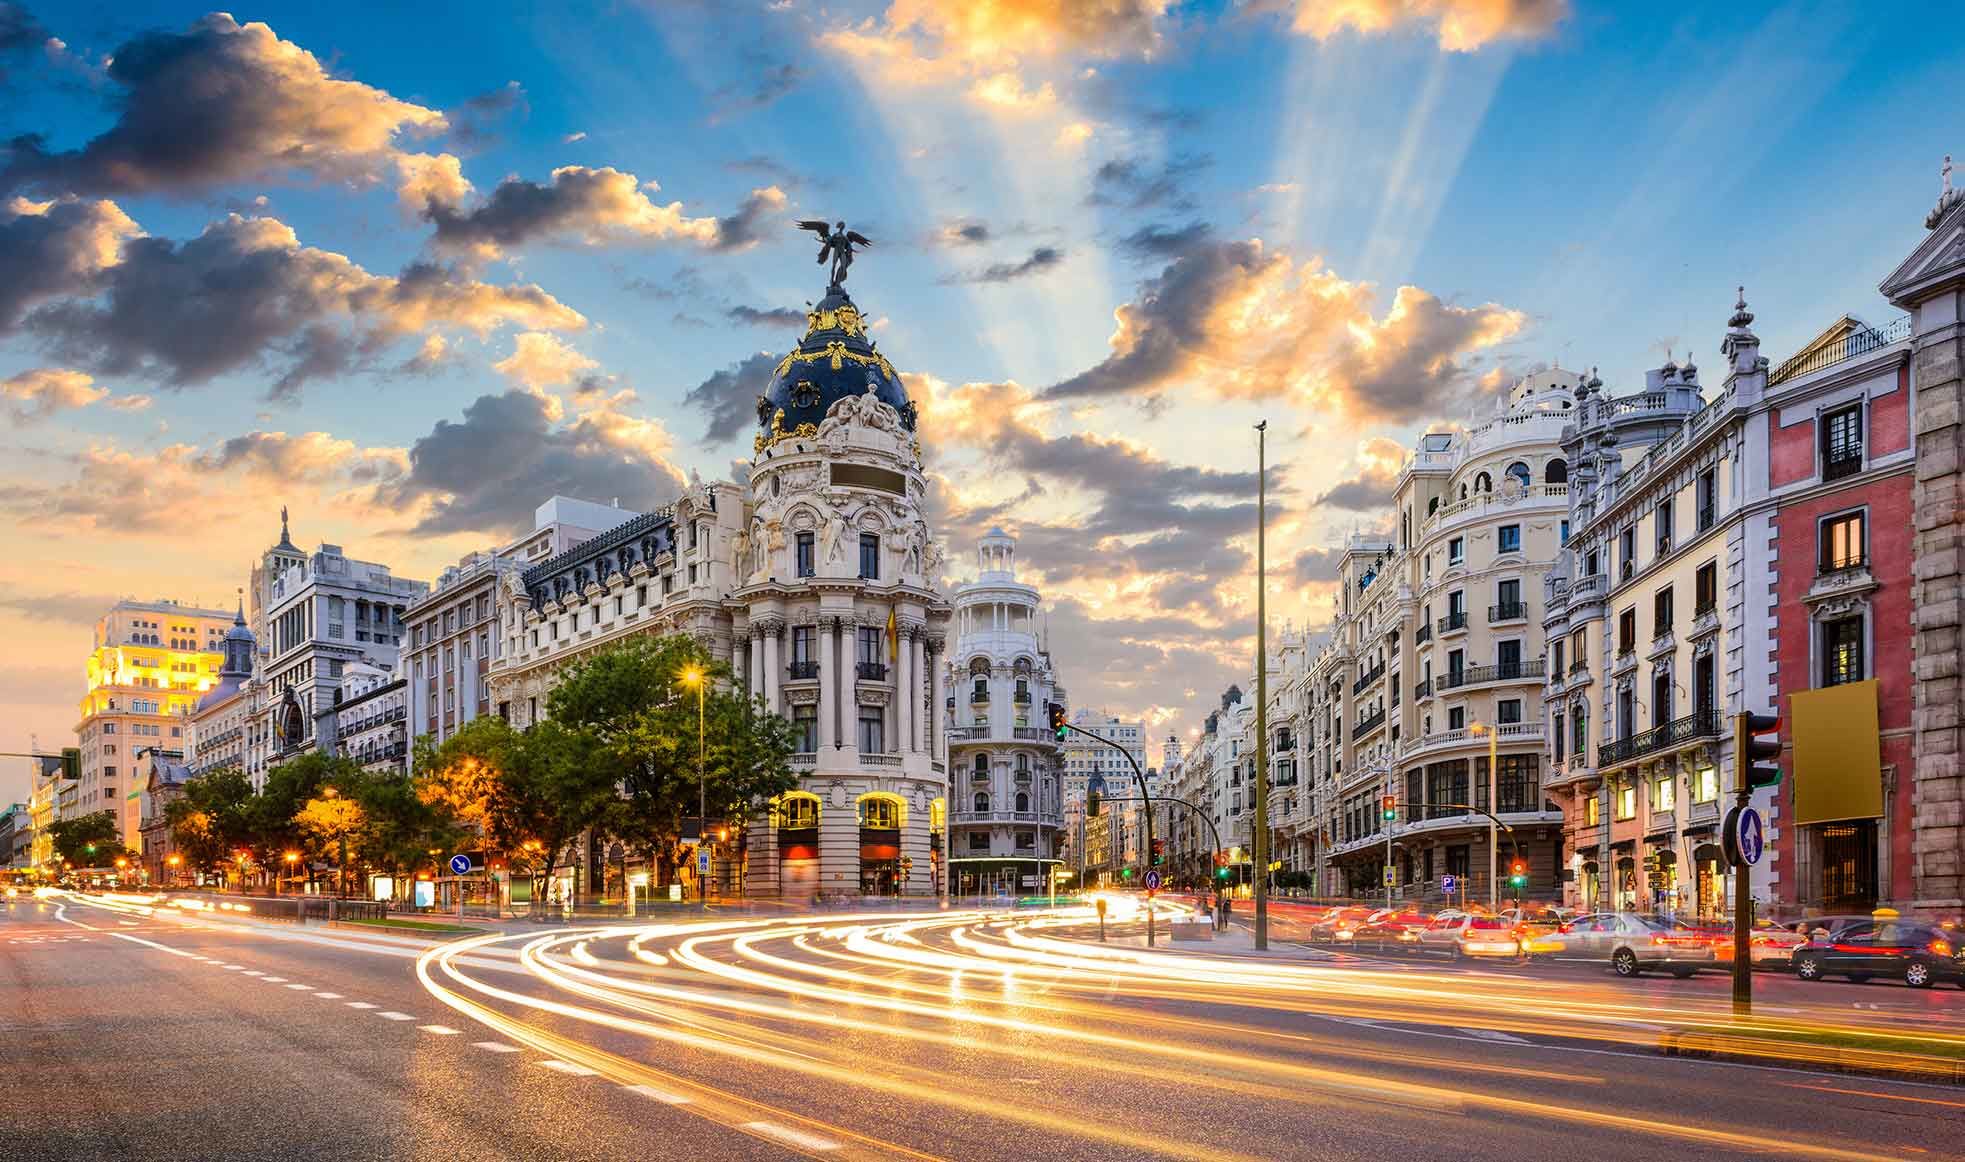 Crypto Week Madrid Summit - Madrid, 07-08 July 2023##5% discount in hotels bookings##promo code: CWMADRID##Find the best hotels deals##Pay with crypto